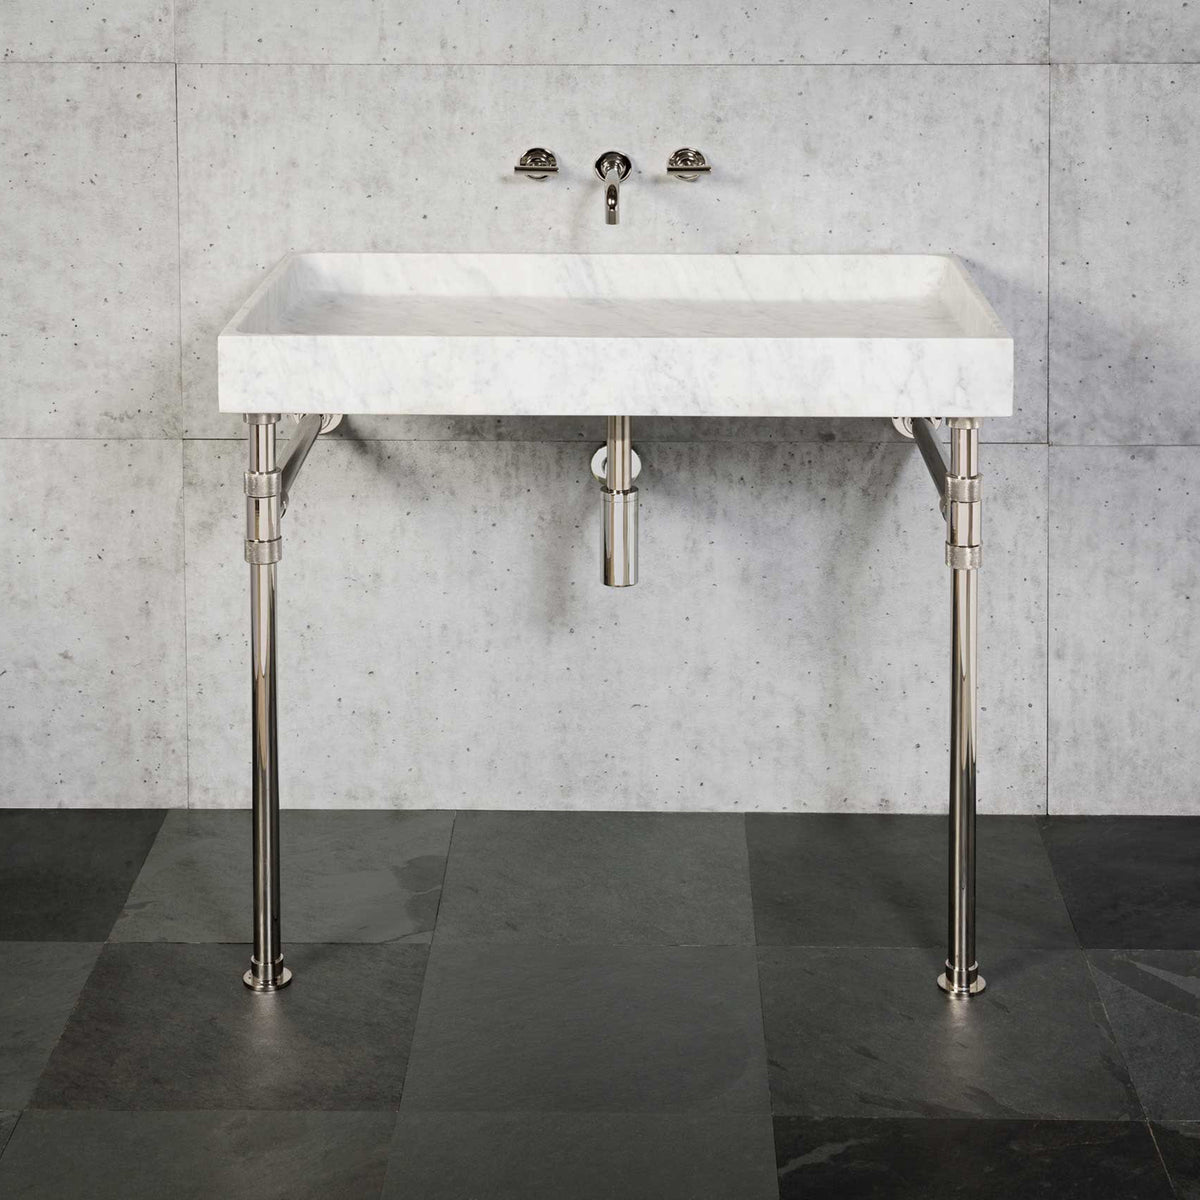 Ventus Bath Sink in carrara marble paired with Elemental Classic Vanity Legs in polished nickel image 2 of 4